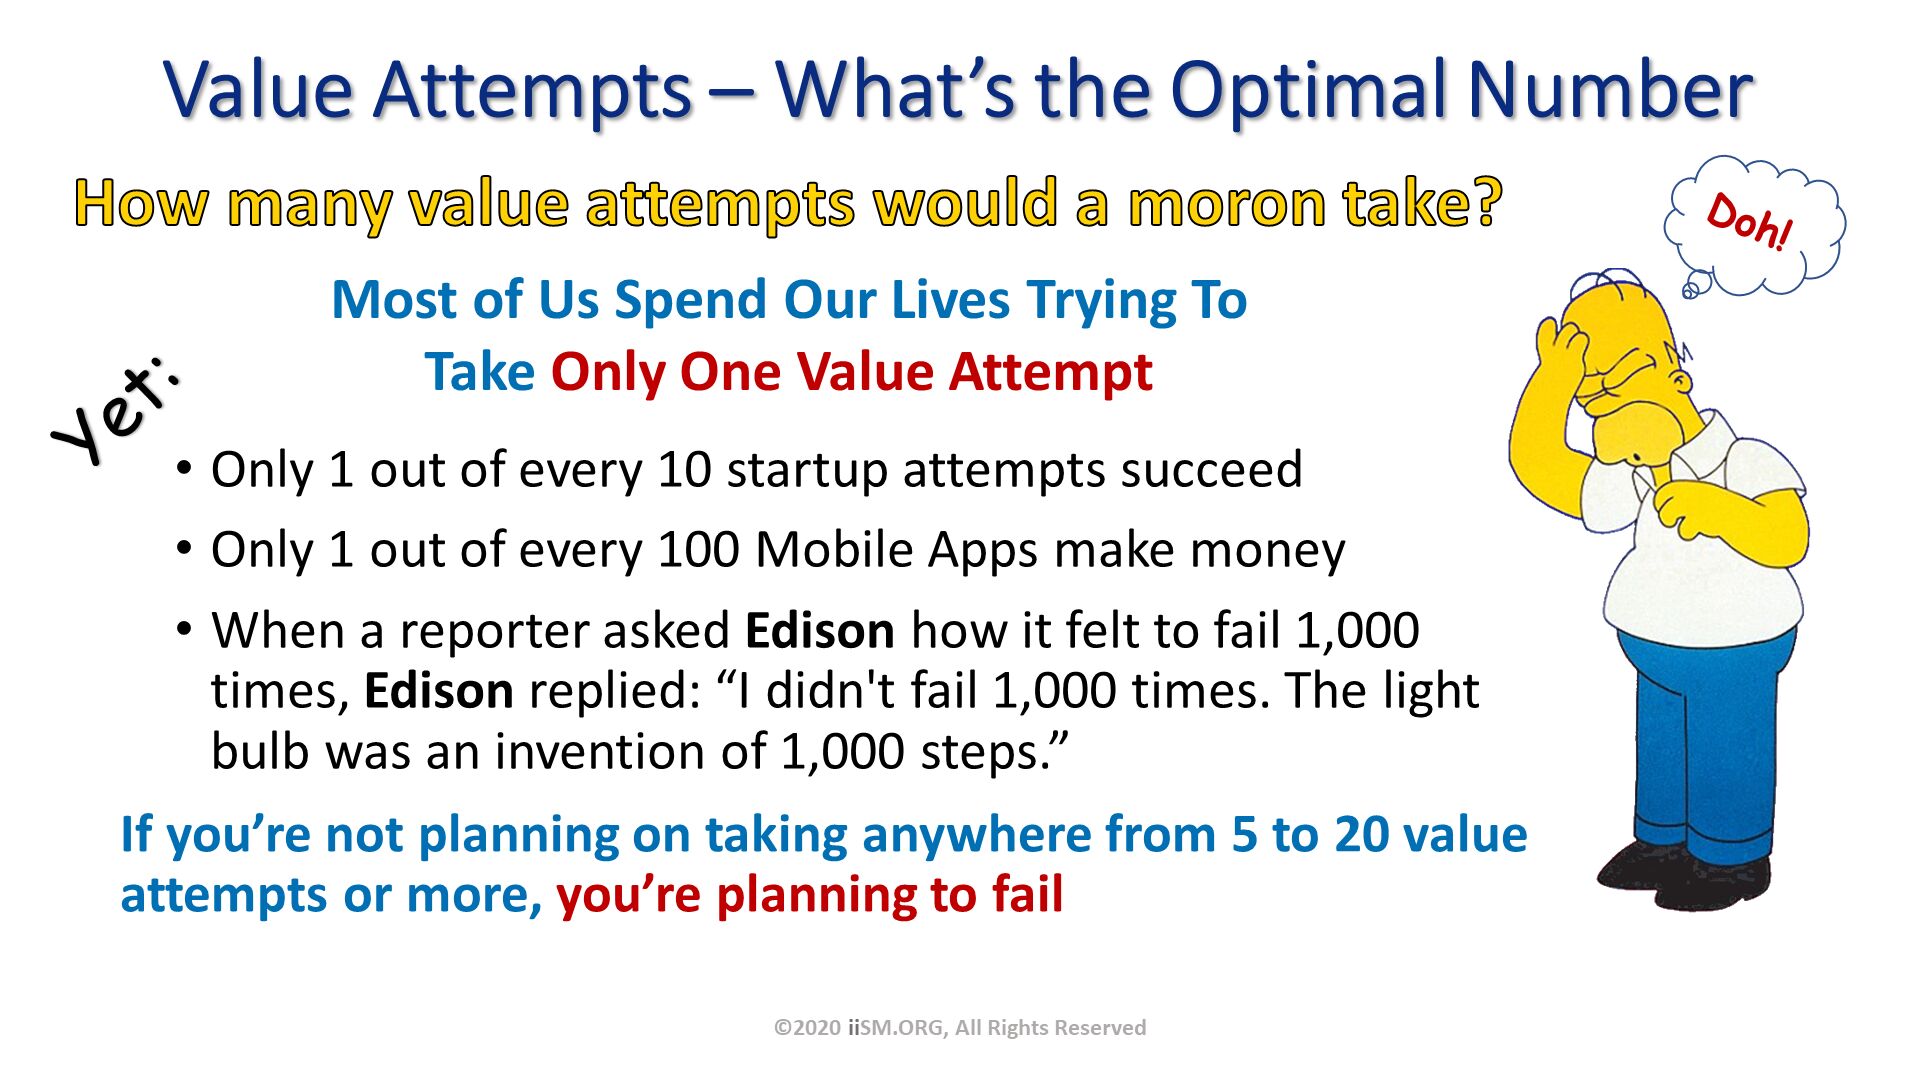 Value Attempts – What’s the Optimal Number. How many value attempts would a moron take?
. ©2020 iiSM.ORG, All Rights Reserved. Doh!. Most of Us Spend Our Lives Trying To 
Take Only One Value Attempt. Only 1 out of every 10 startup attempts succeed
Only 1 out of every 100 Mobile Apps make money
When a reporter asked Edison how it felt to fail 1,000 times, Edison replied: “I didn't fail 1,000 times. The light bulb was an invention of 1,000 steps.”. If you’re not planning on taking anywhere from 5 to 20 value attempts or more, you’re planning to fail
. Yet:. 